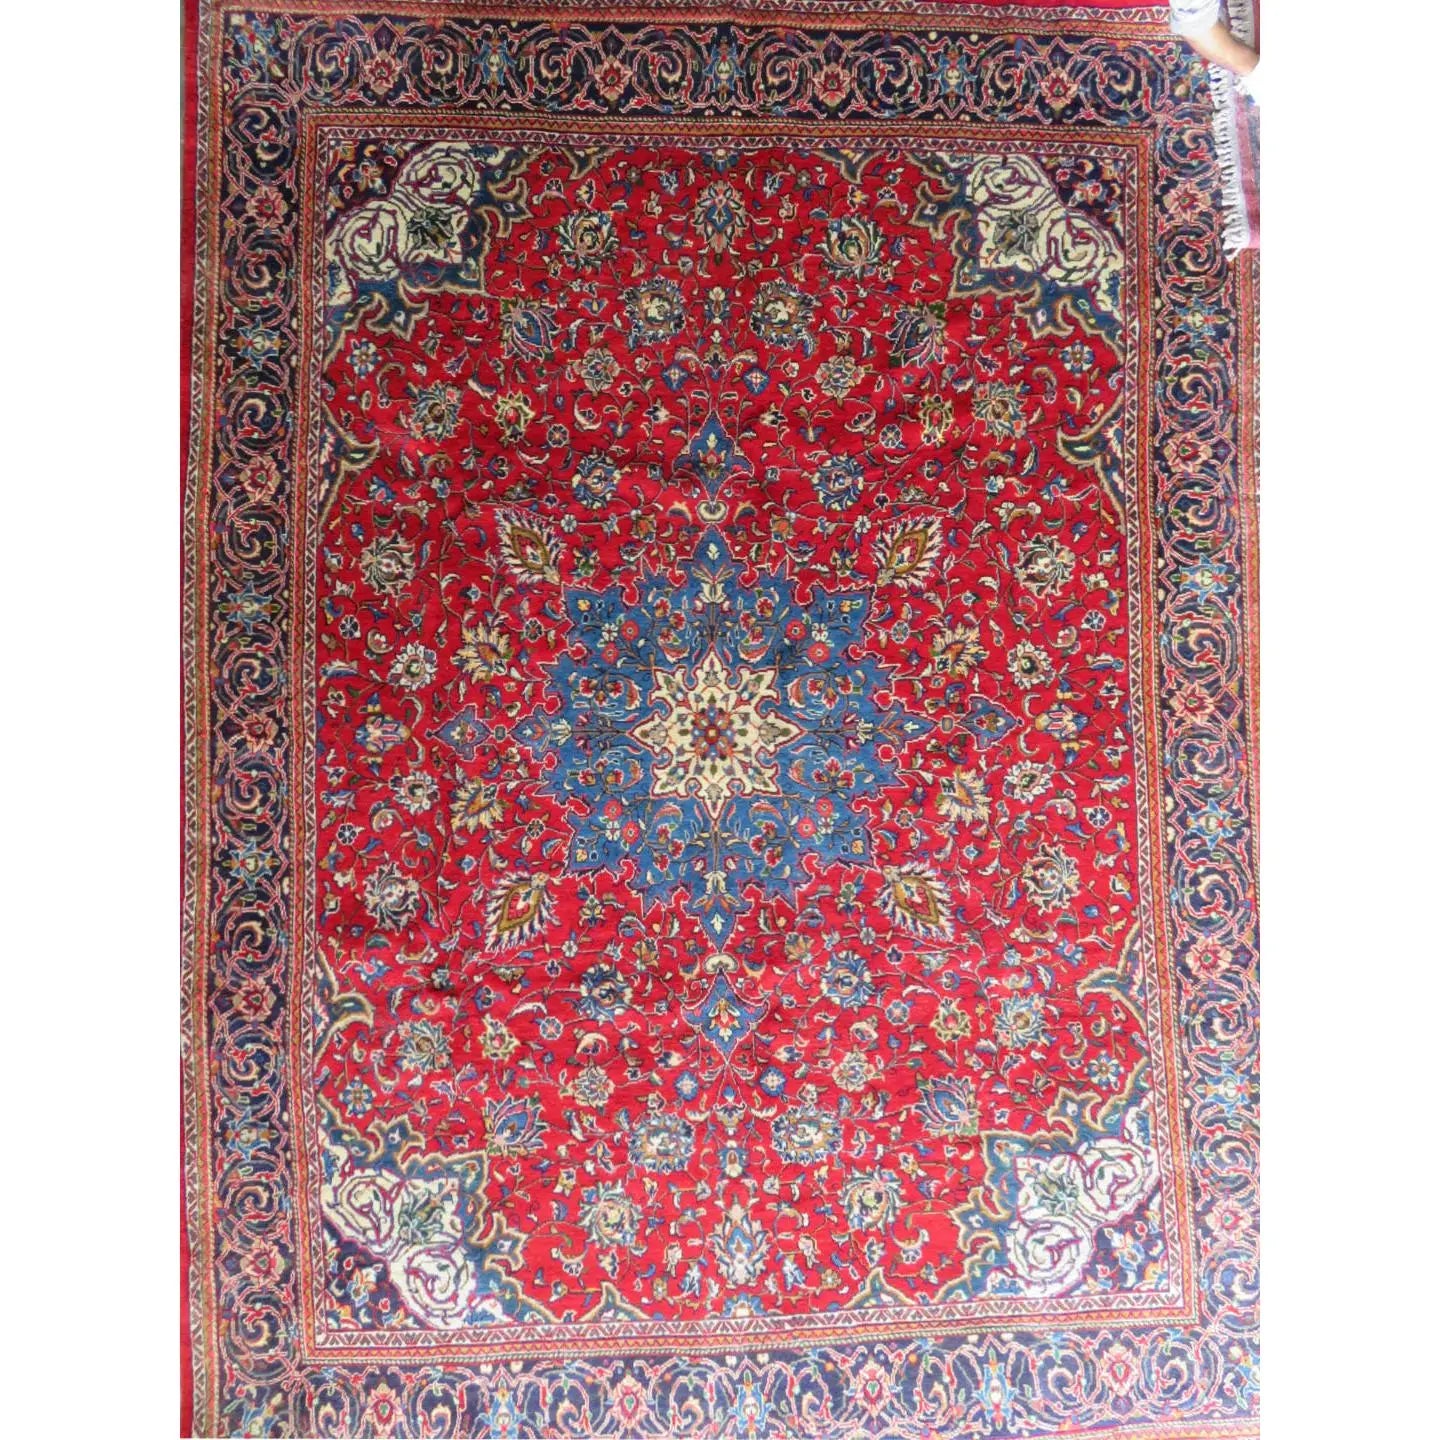 Hand-Knotted Persian Wool Rug – Luxurious Vintage Design, 13'5" x 9'8", Artisan Crafted